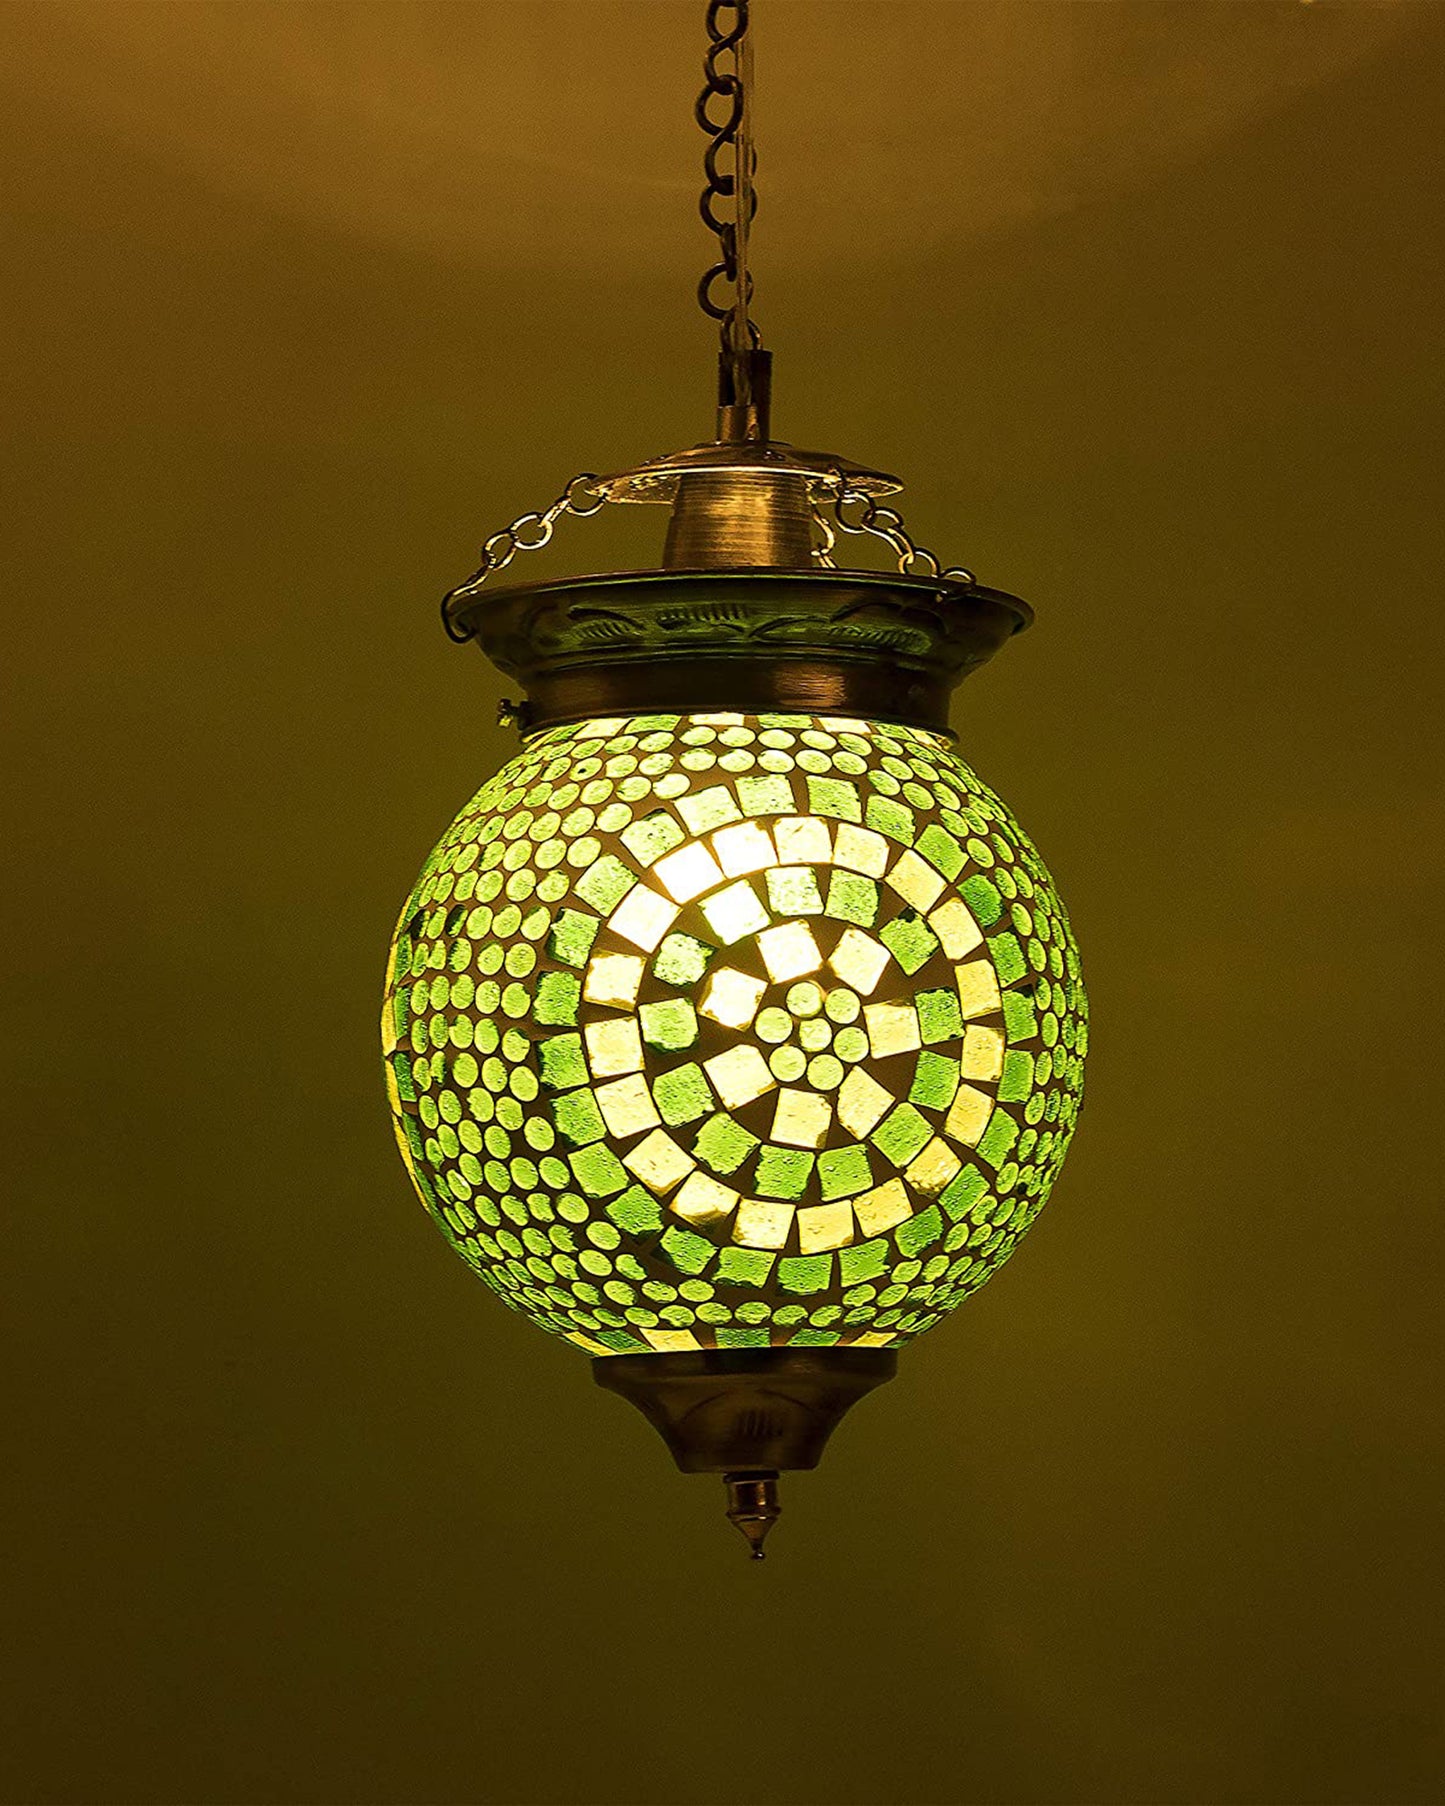 Antique Turkish Moroccan Mosaic Pendant with Metal Ceiling Hanging Light